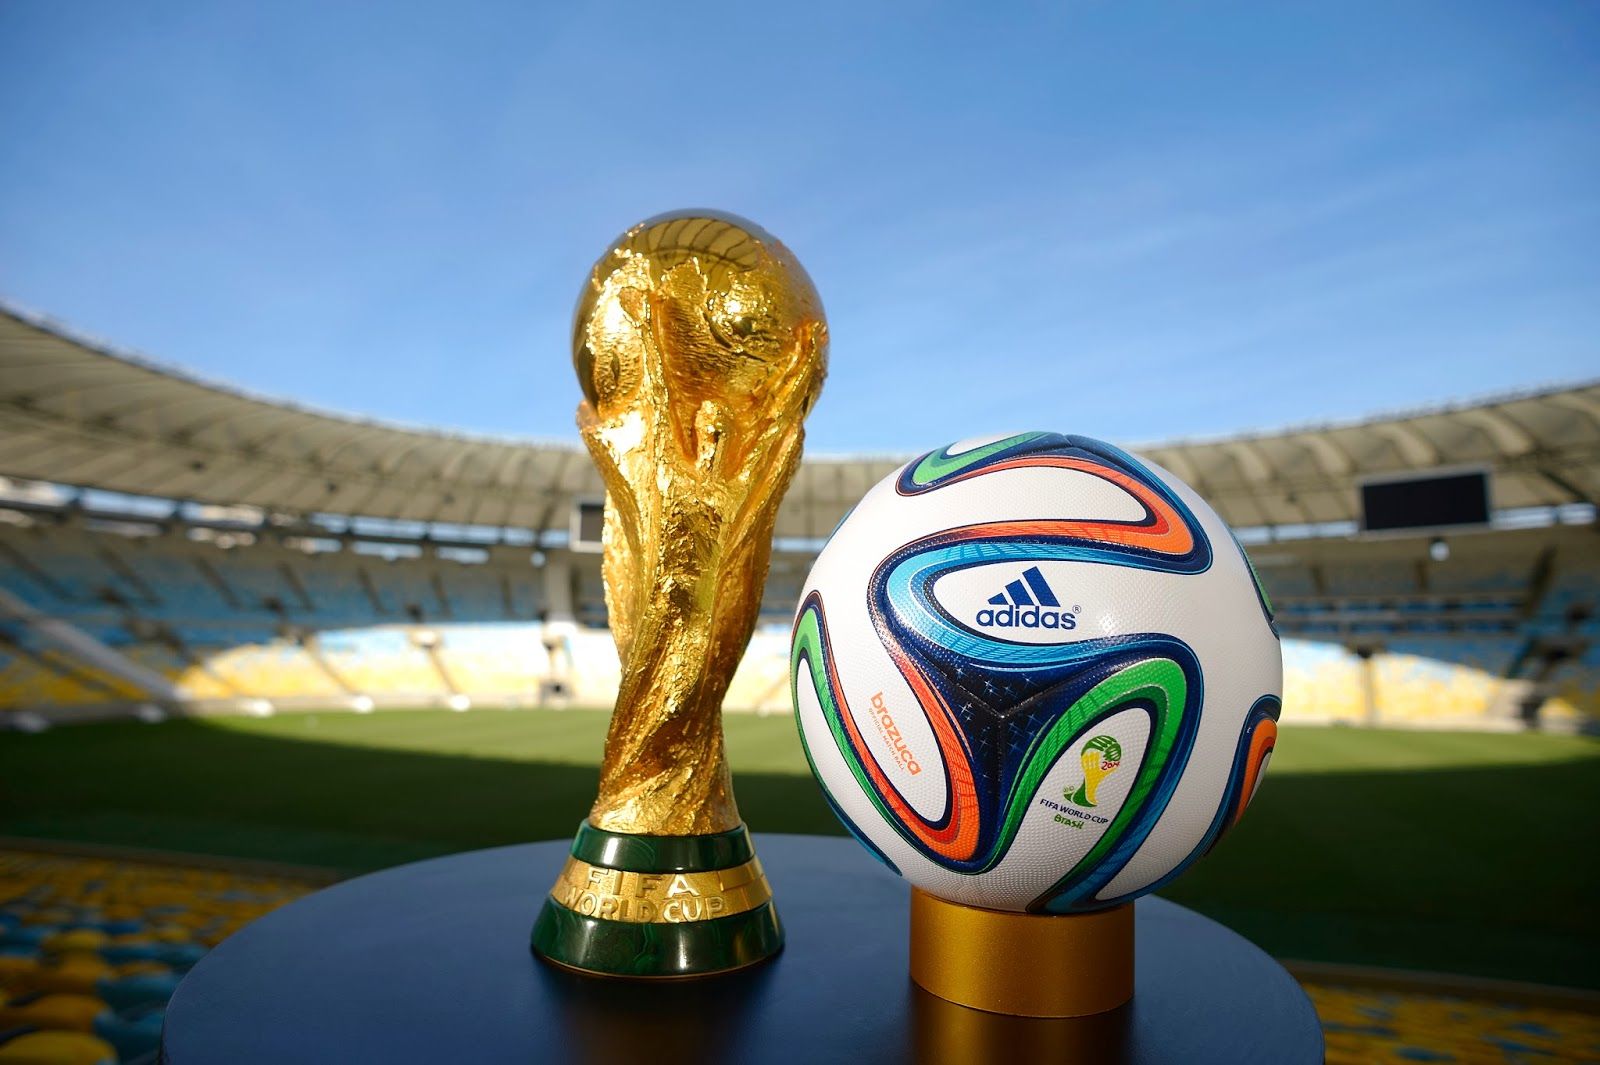 The 2014 World Cup and the official match ball, Brazuca